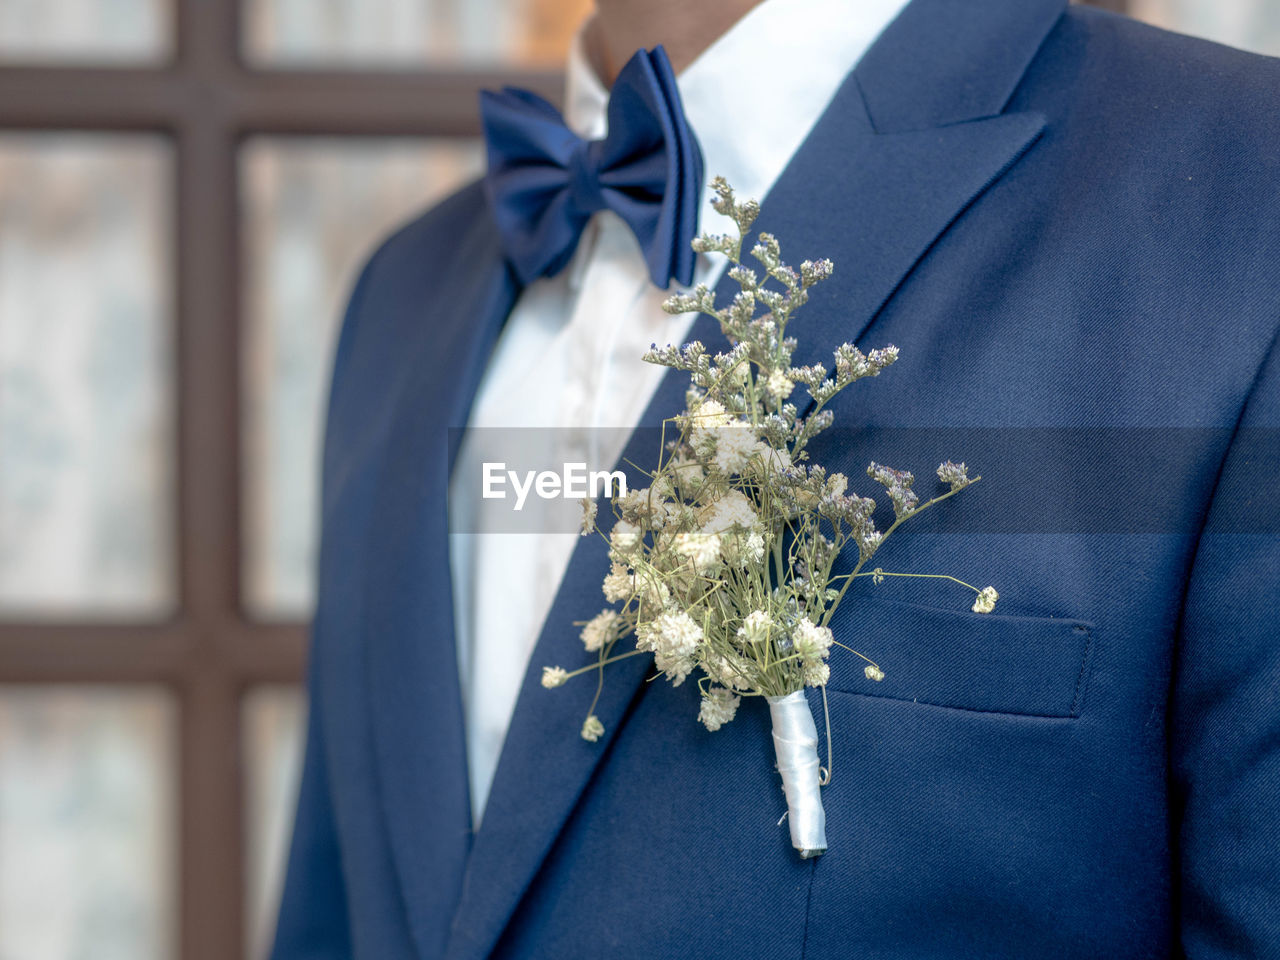 Midsection of bridegroom wearing suit